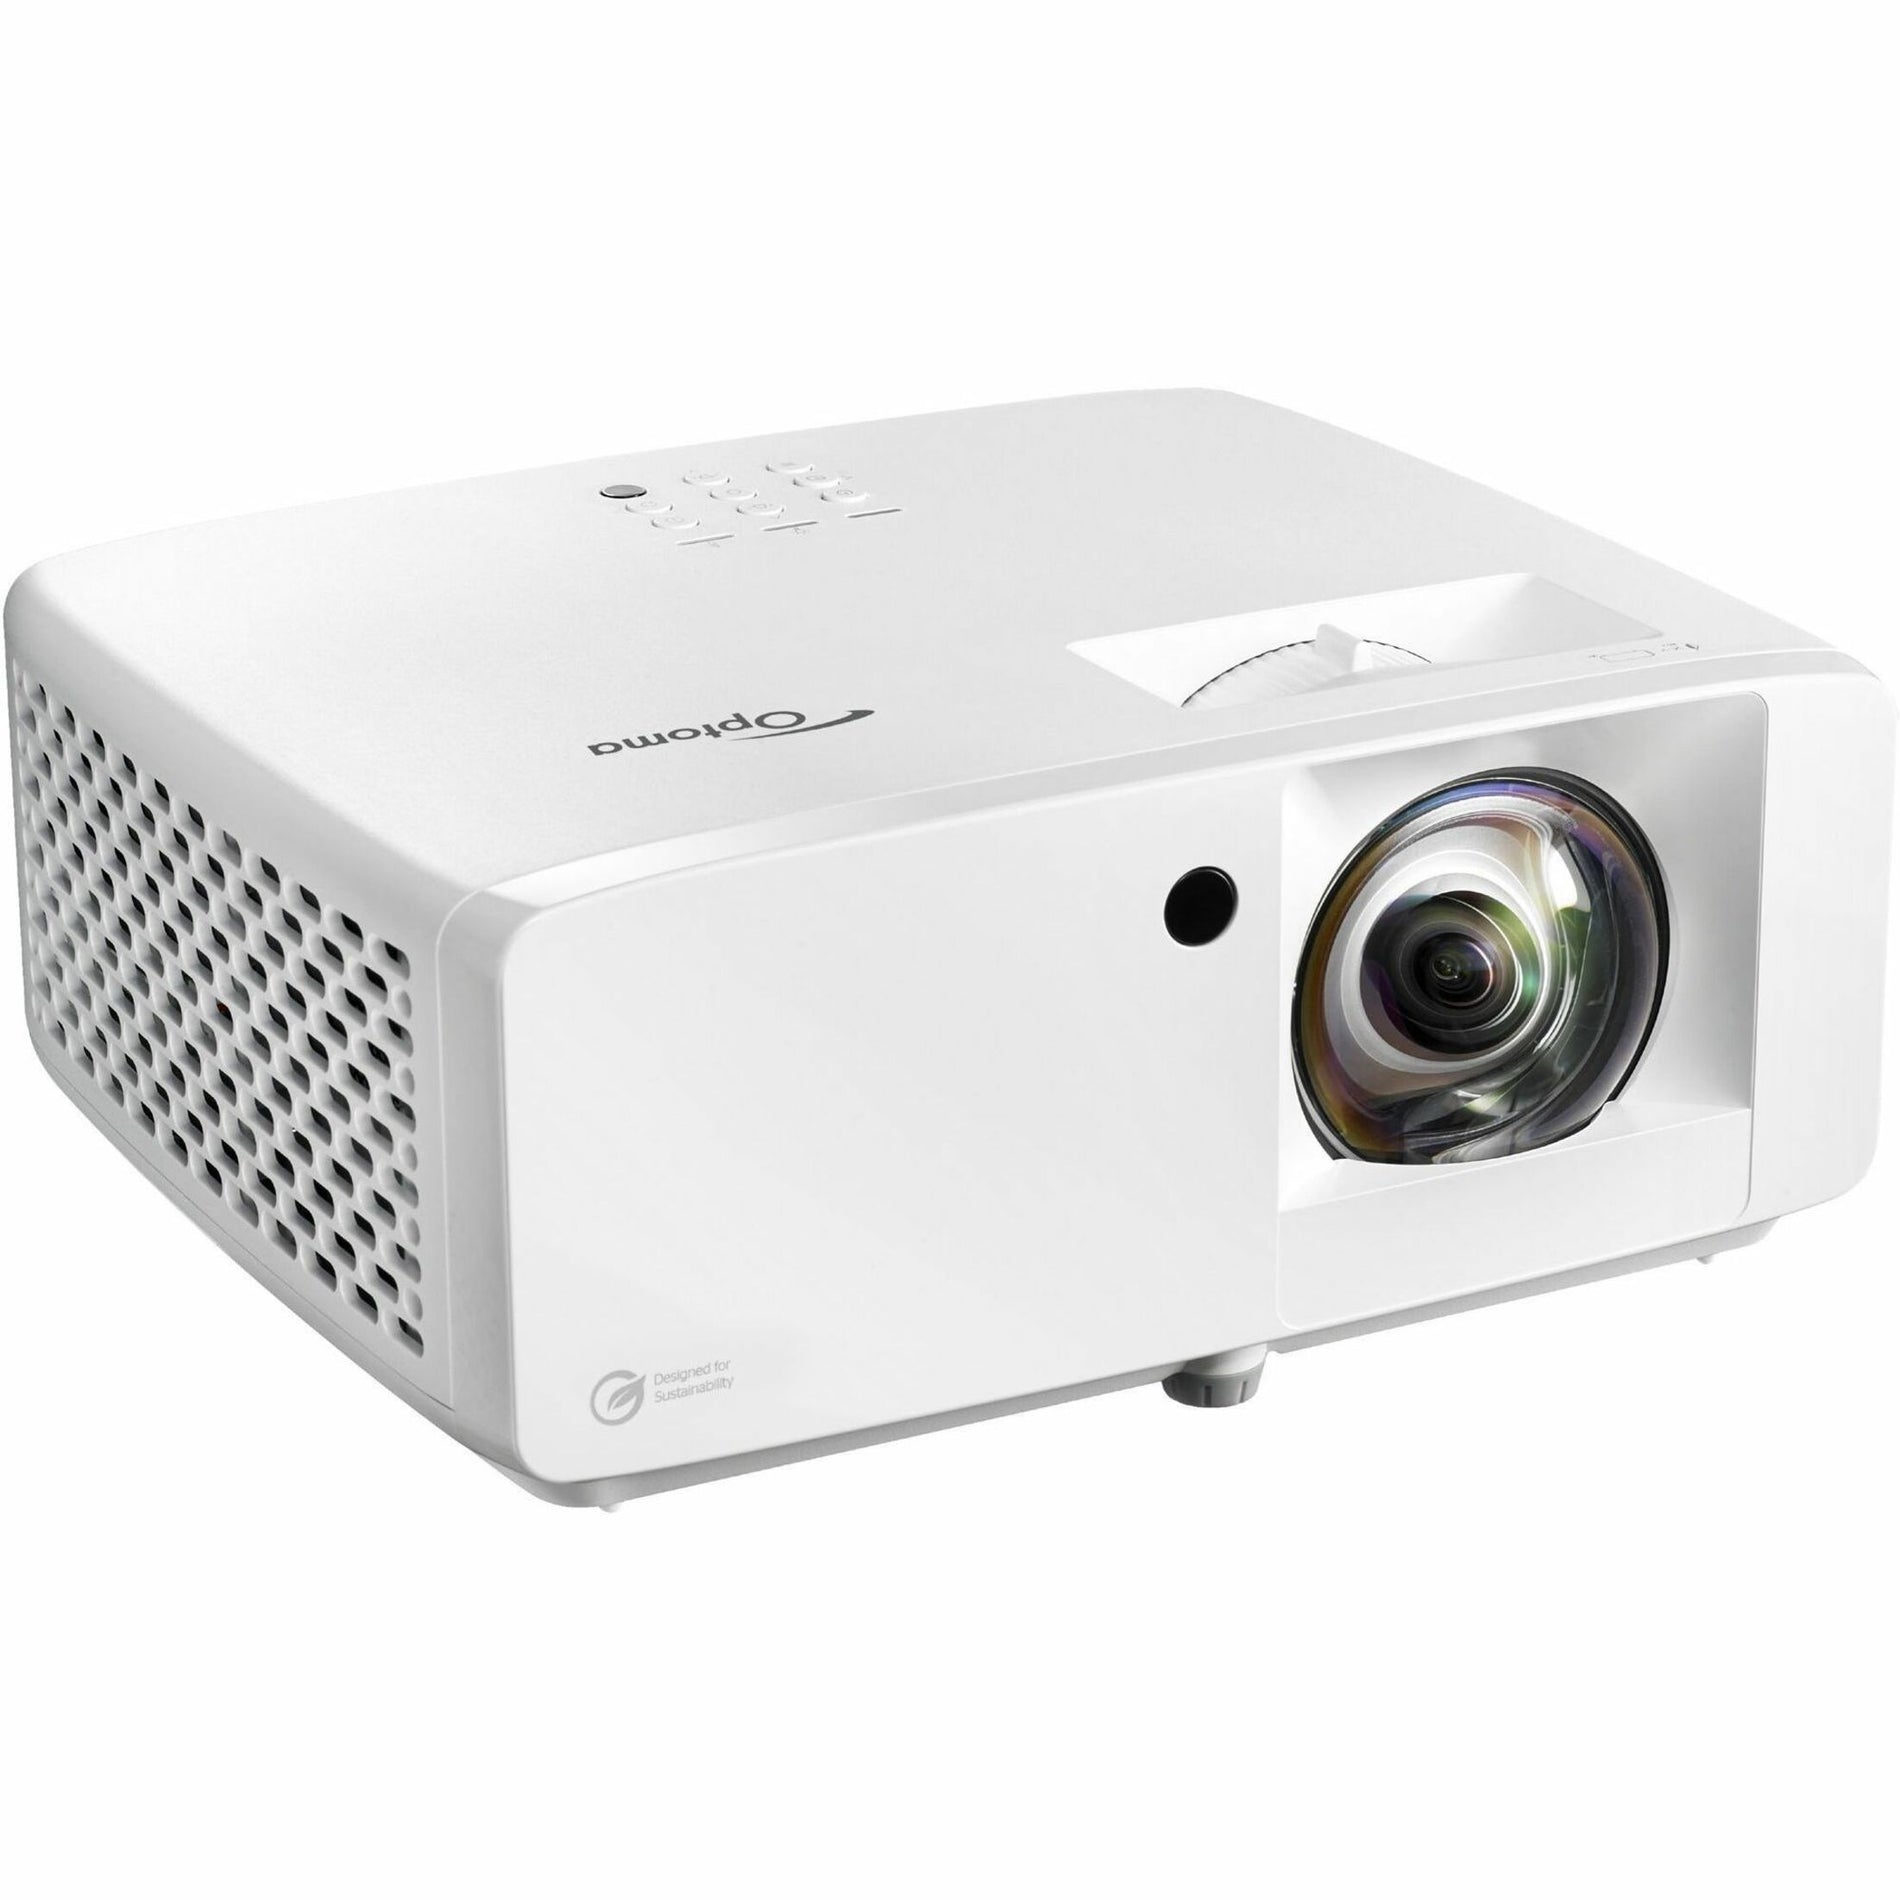 Optoma 4200 lumen 1080p HDR DuraCore Laser DLP projector (GT2100HDR)